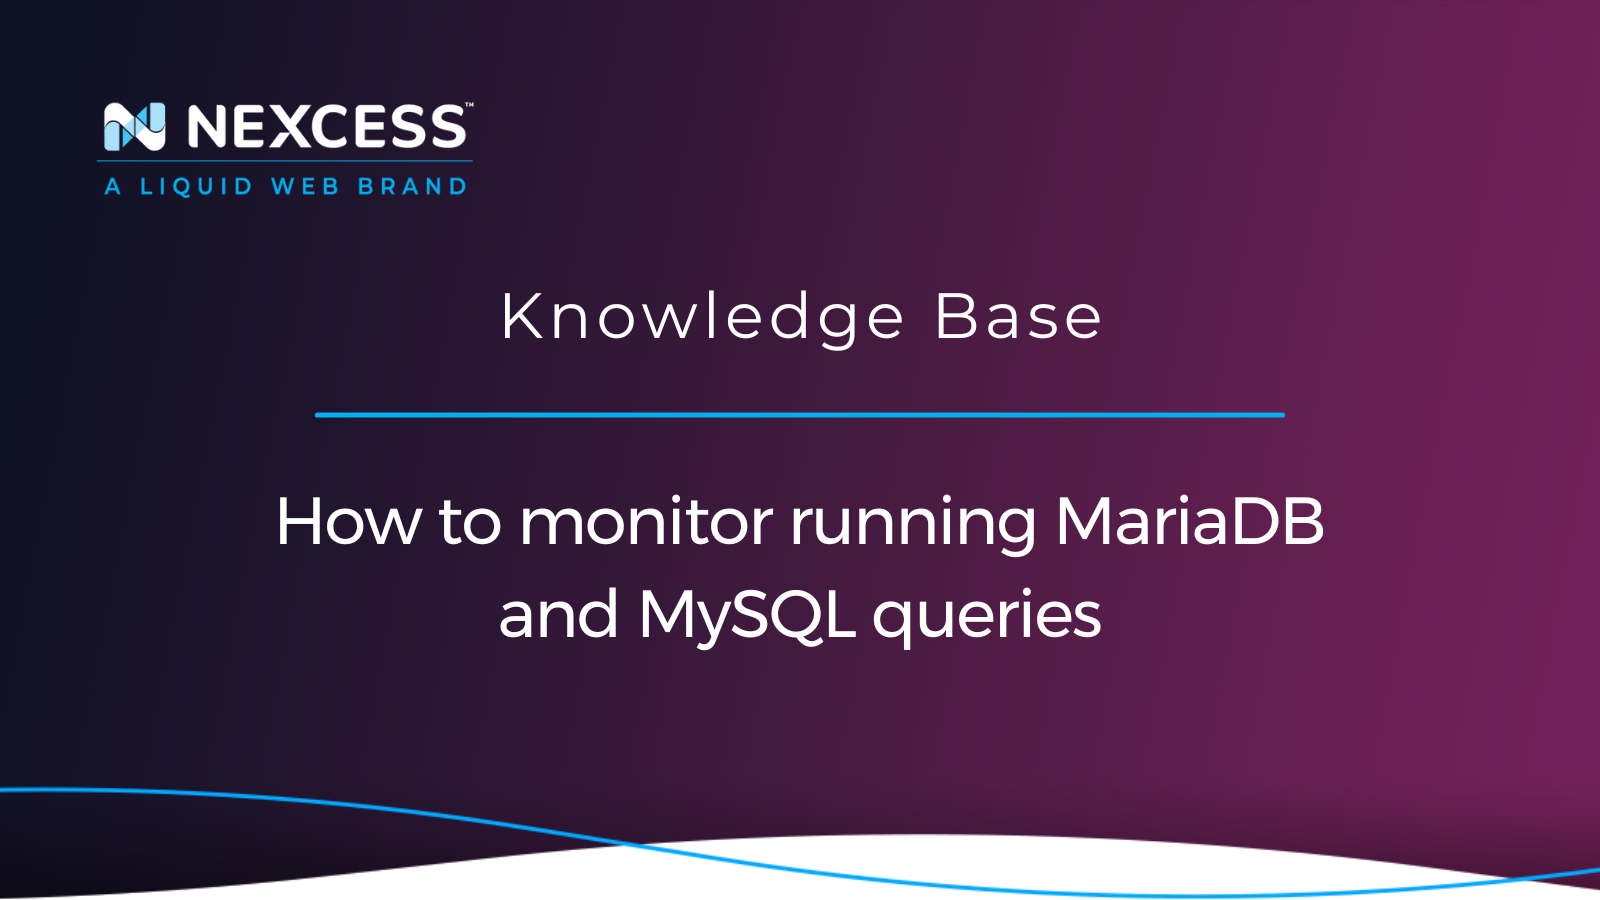 How to monitor running MariaDB and MySQL queries